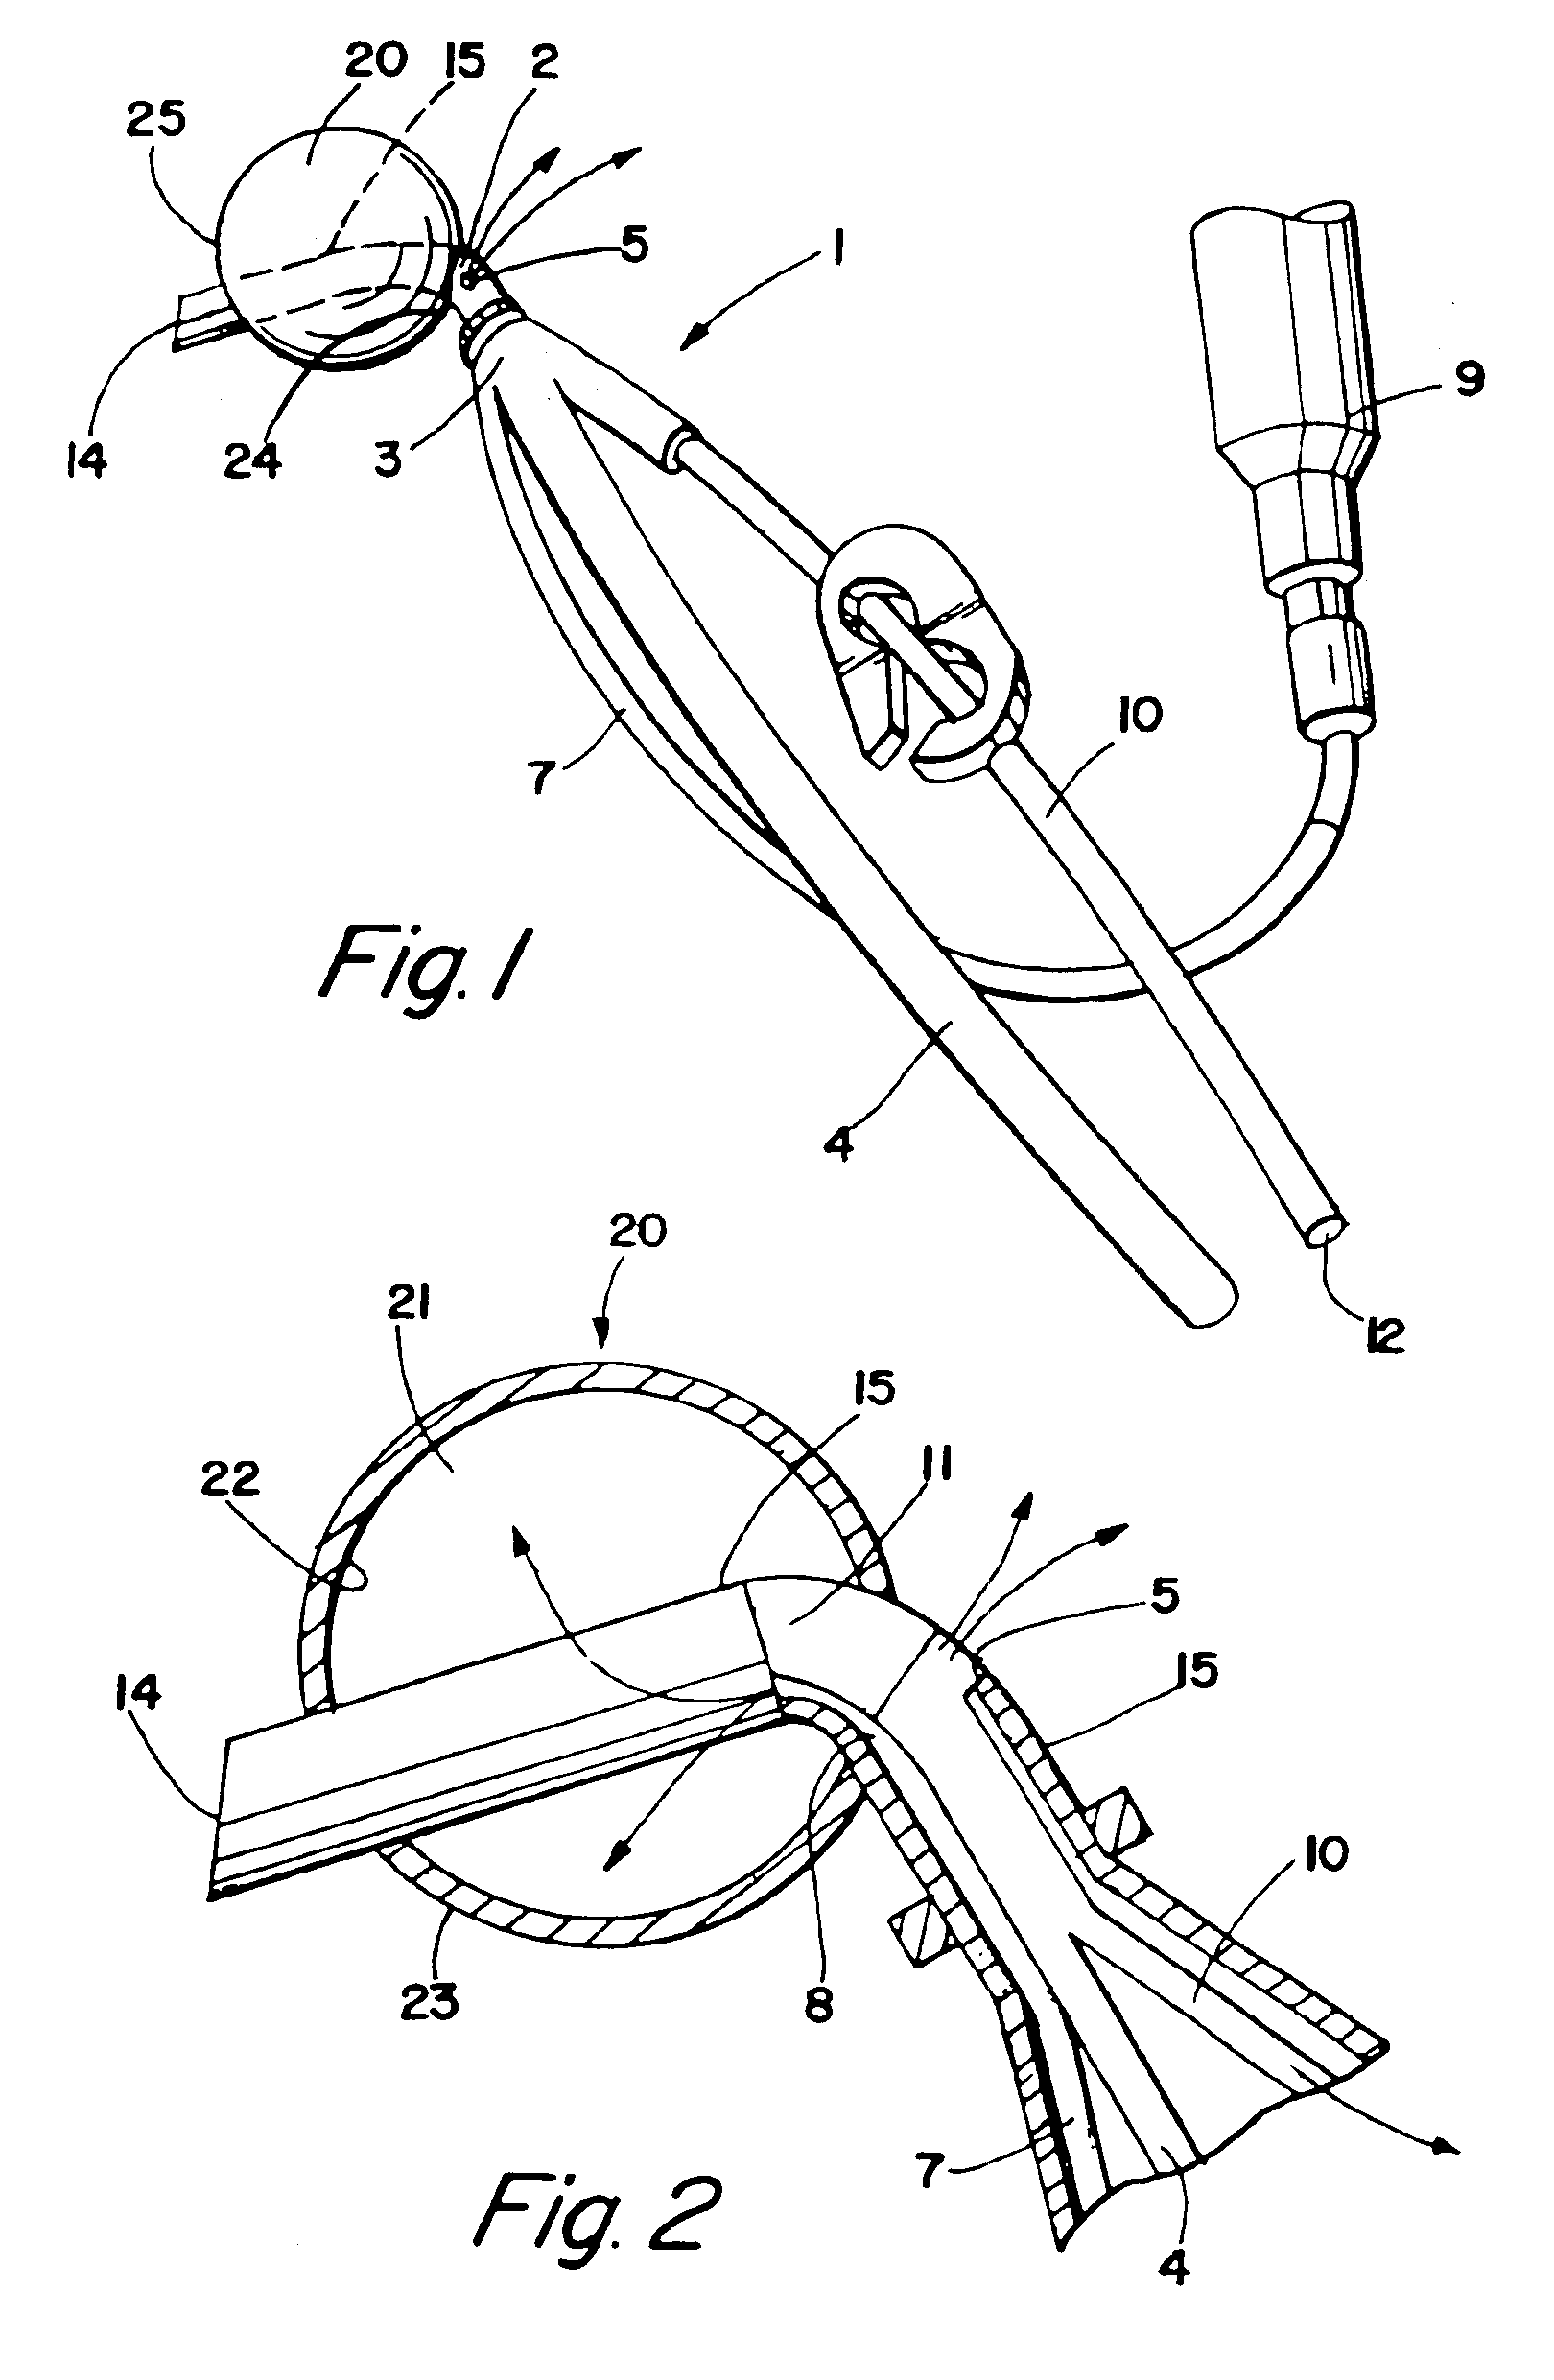 Balloon occlusion device and methods of use